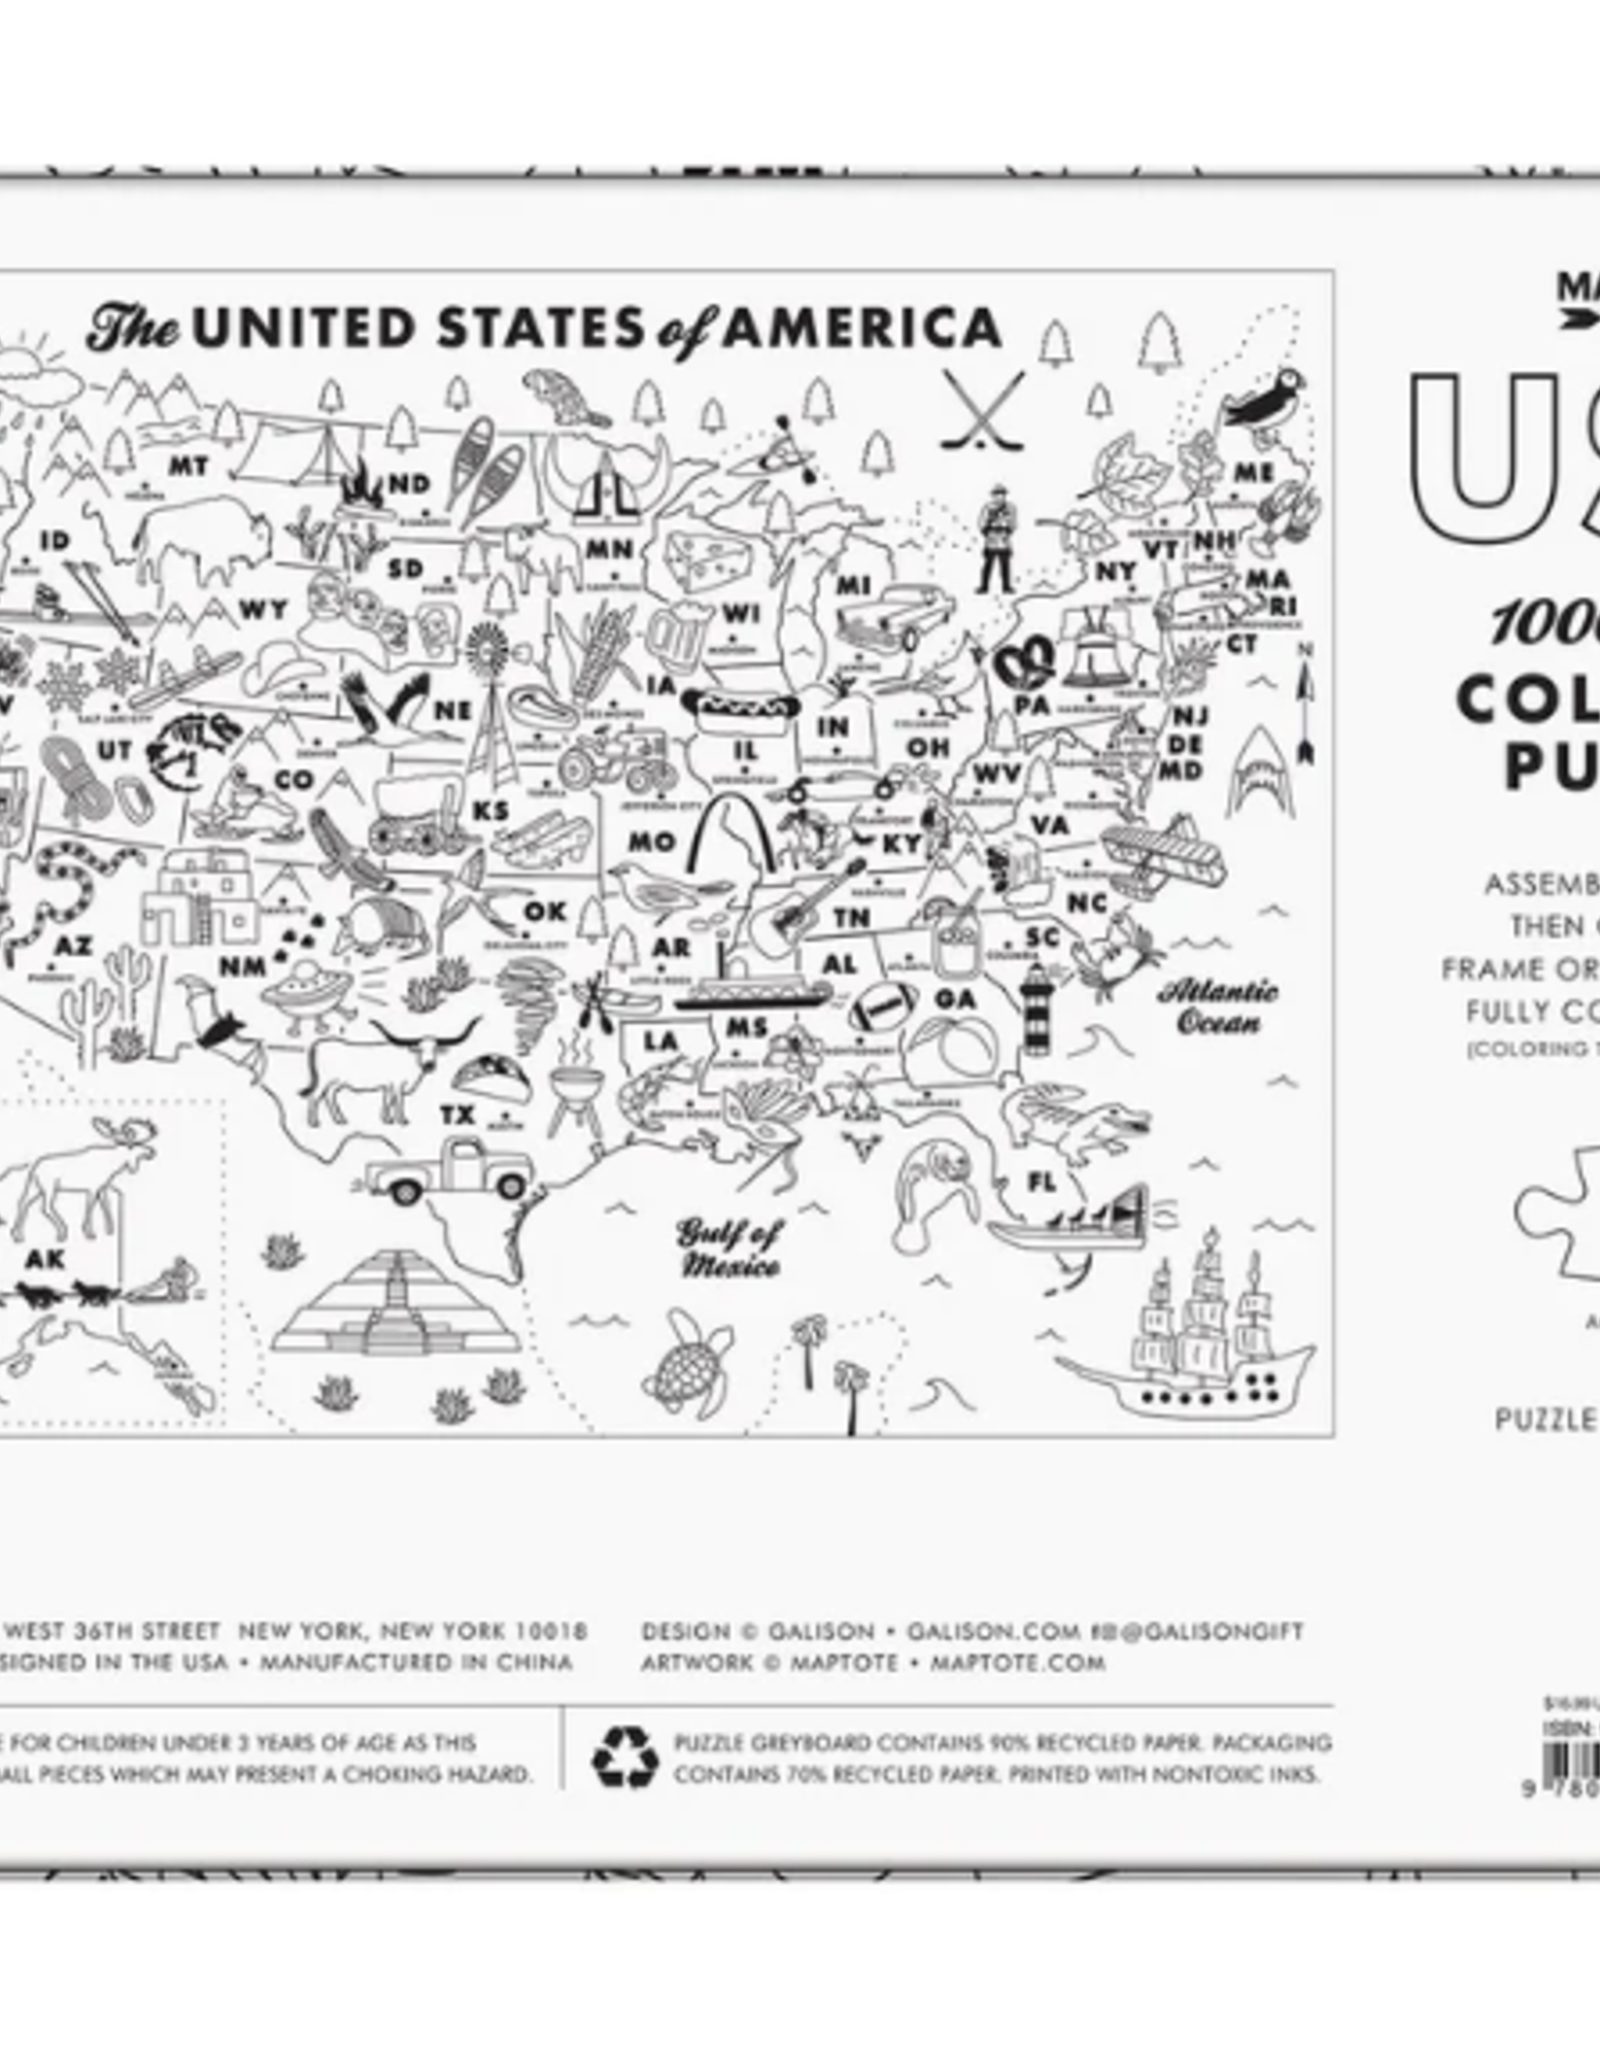 Chronicle Books Puzzle: Color-In USA (1000)